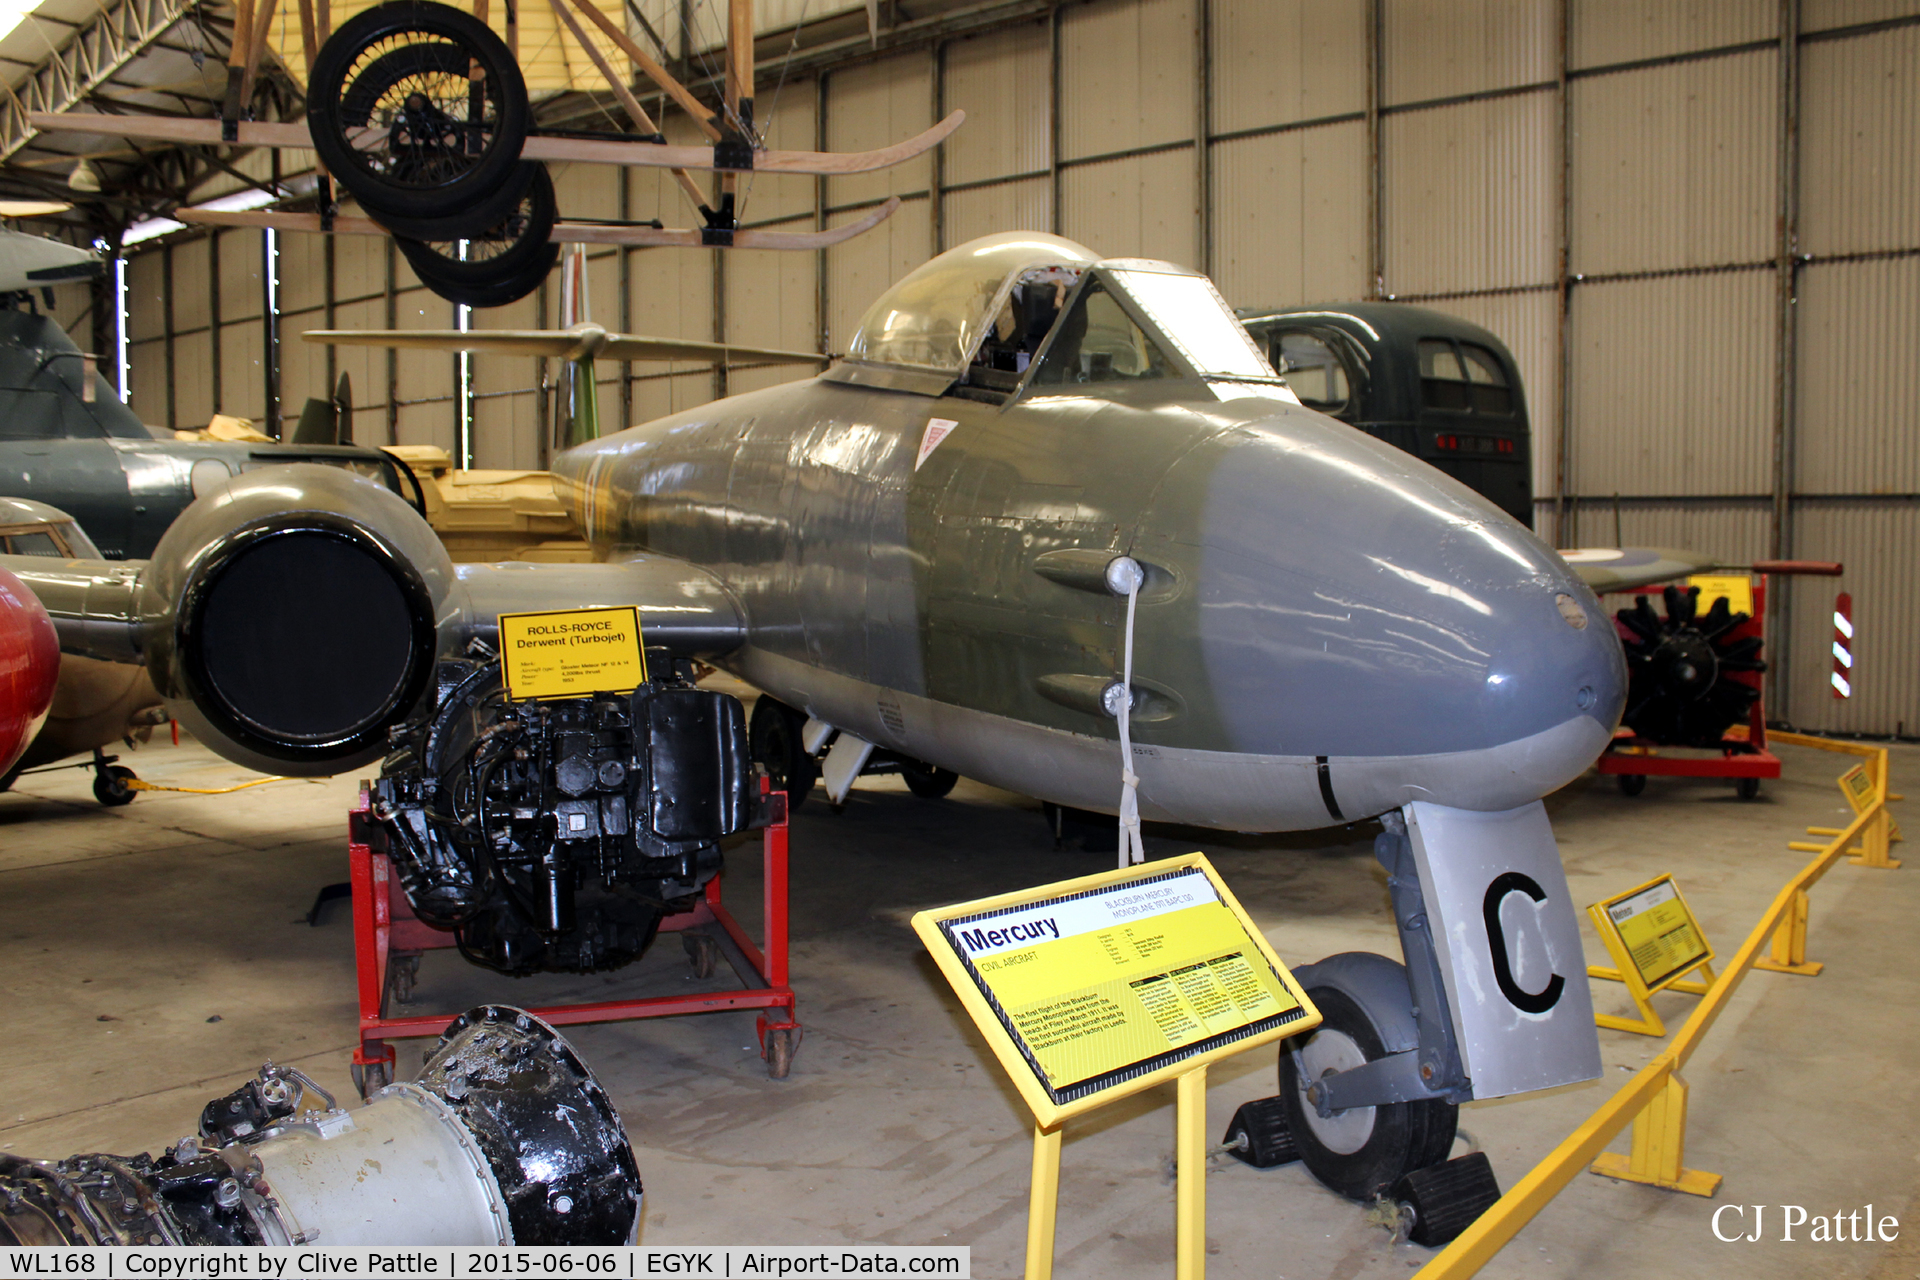 WL168, Gloster Meteor F.8 C/N Not found WL168, On display at the Yorkshire Air Museum EGYK